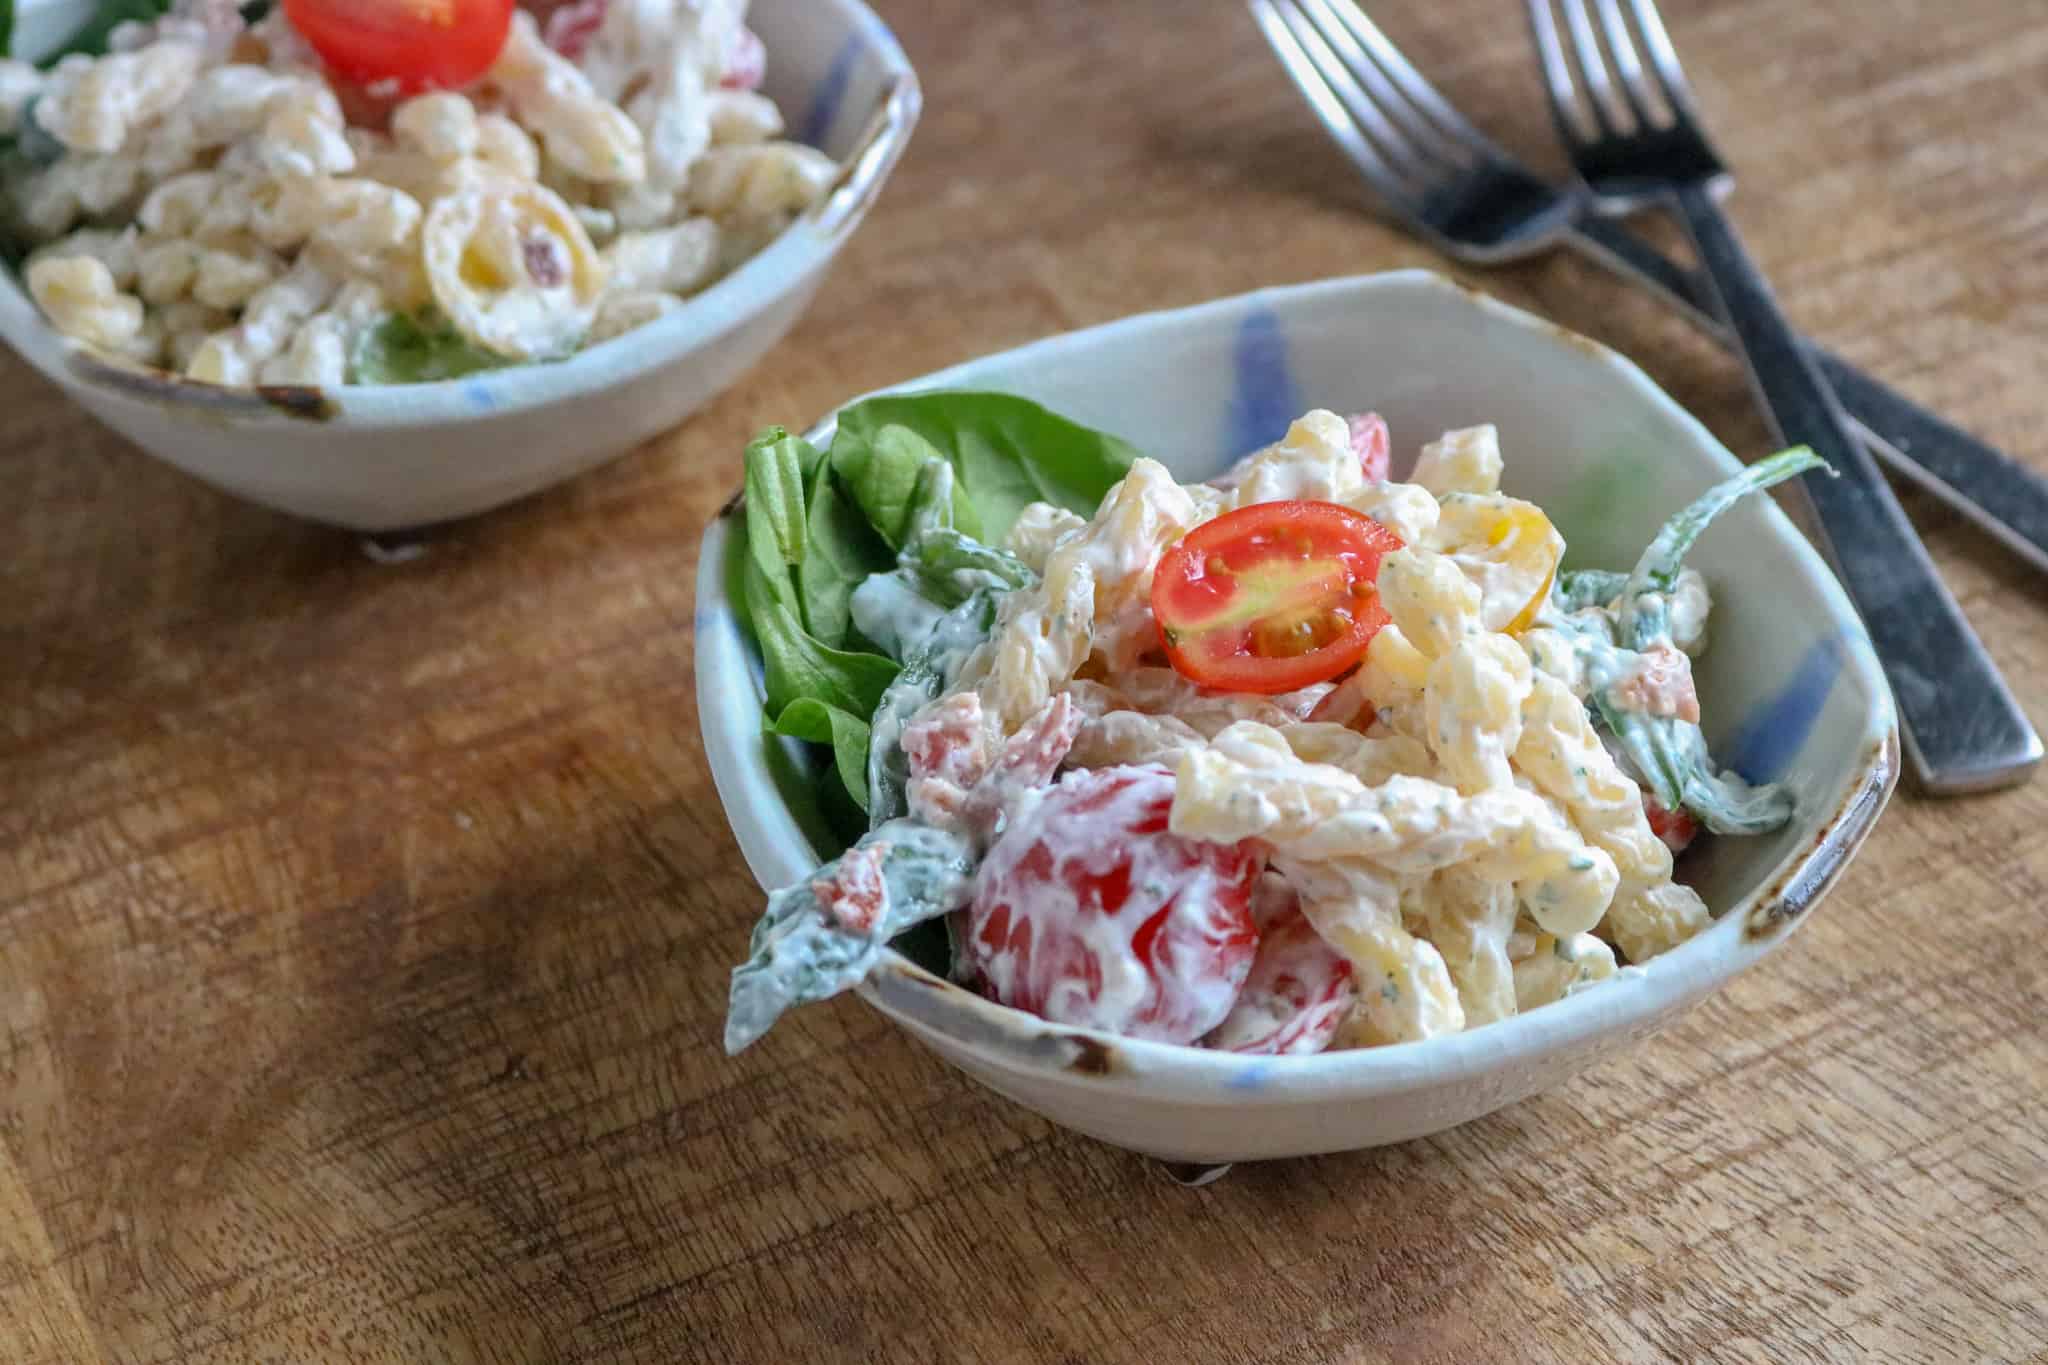 two portions of Delicious BLT Pasta Salad served in white bowls placed next to a pair of forks